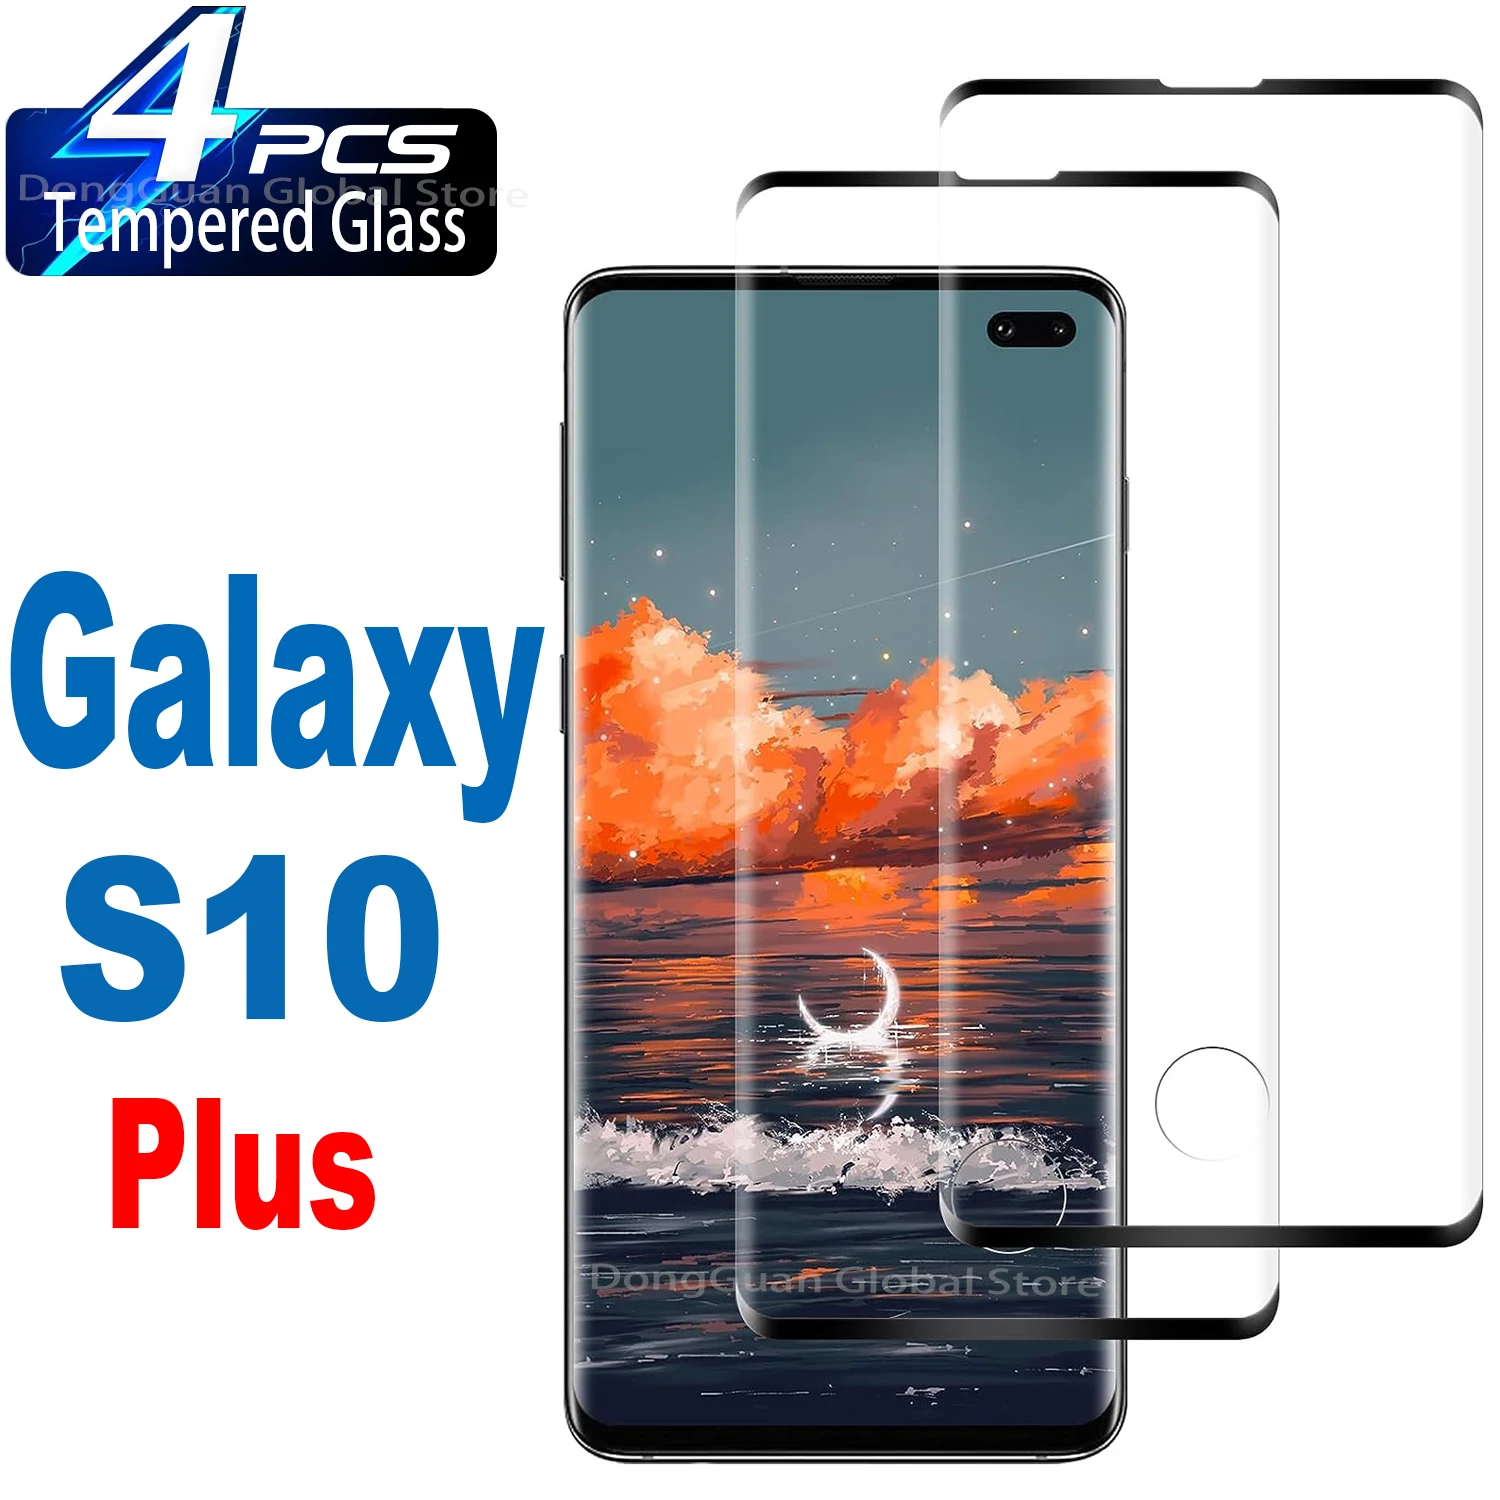 2/4Pcs Tempered Glass For Samsung Galaxy S10 Plus S10+ S20 S20+ Plus Screen Protector Glass